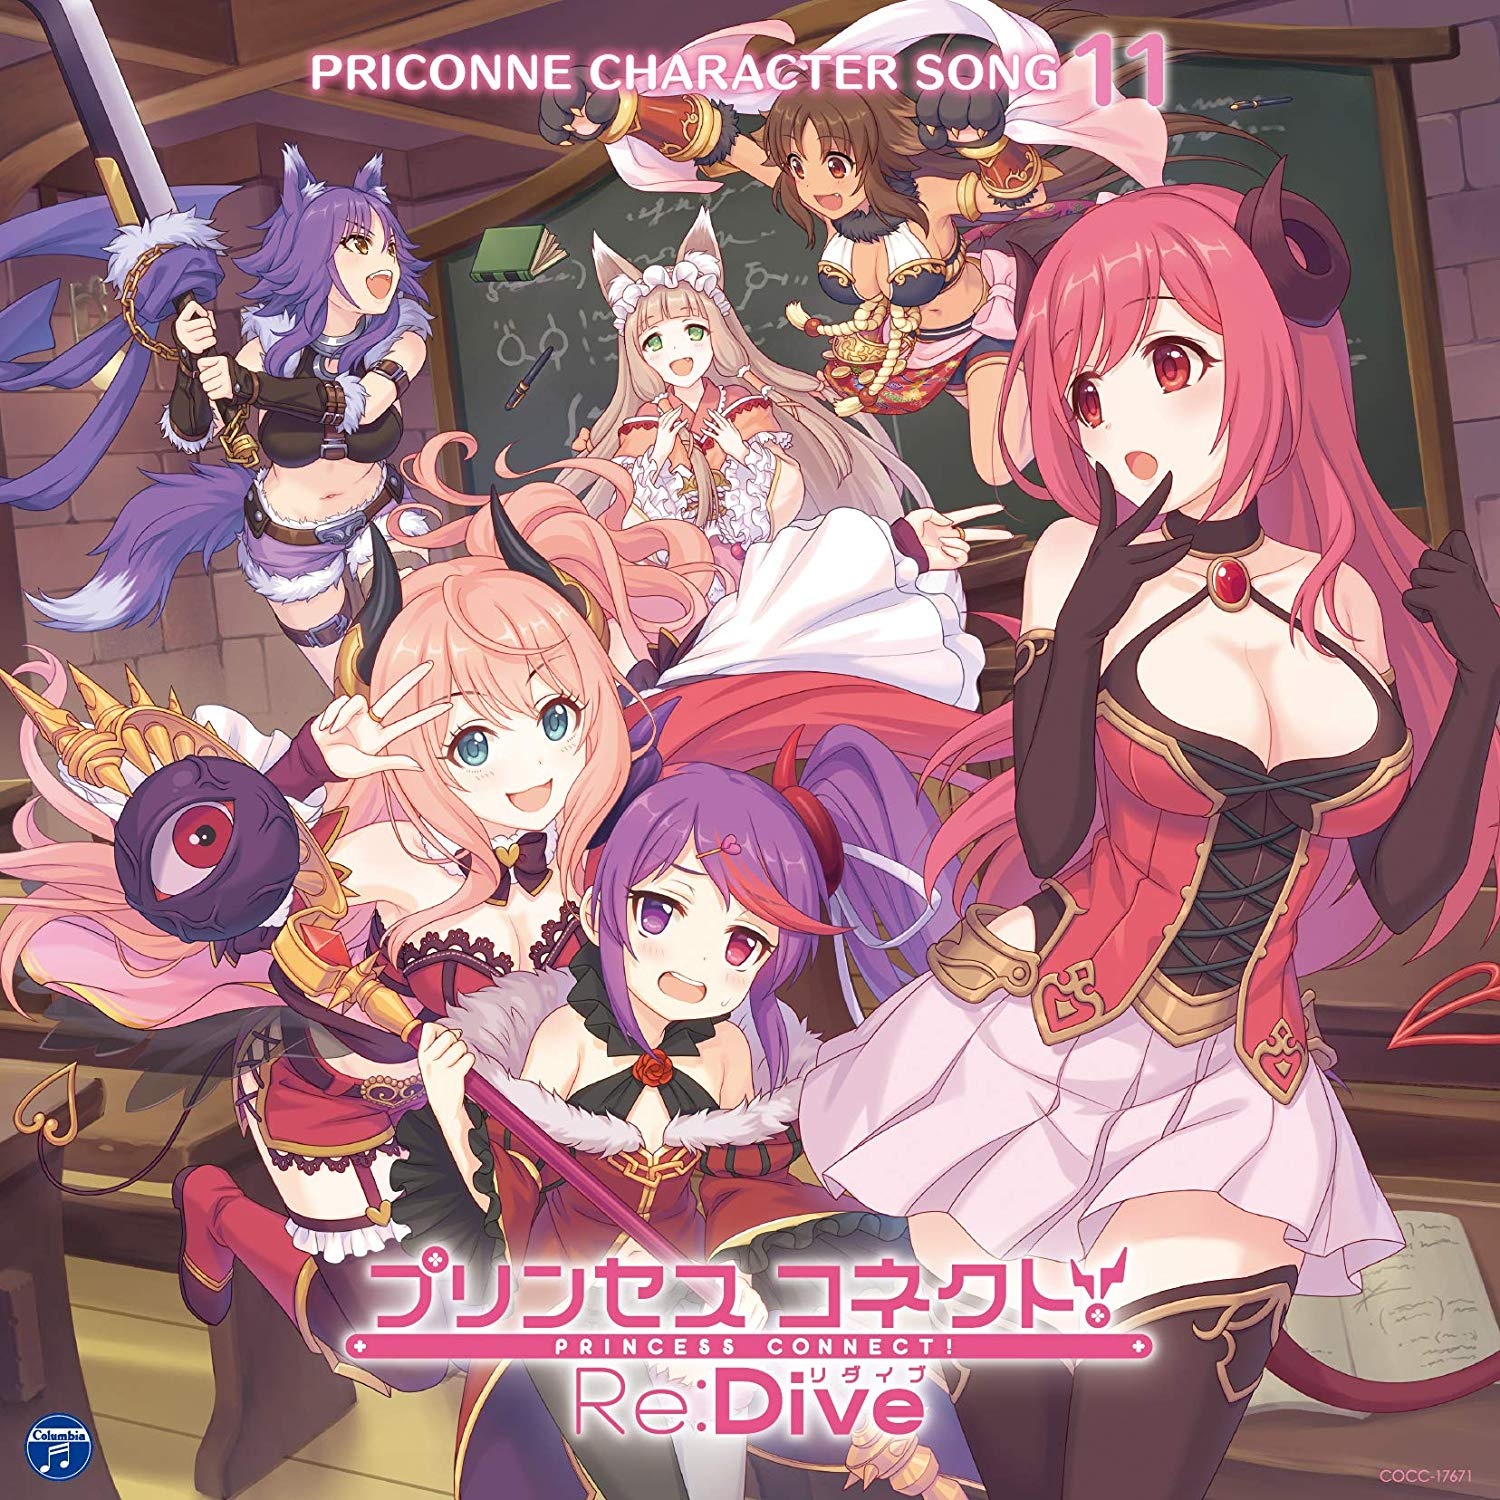 We Are Golden歌词 歌手内田真礼 / 小松未可子 / 高森奈津美-专辑PRINCESS CONNECT! Re:Dive PRICONNE CHARACTER SONG 11-单曲《We Are Golden》LRC歌词下载